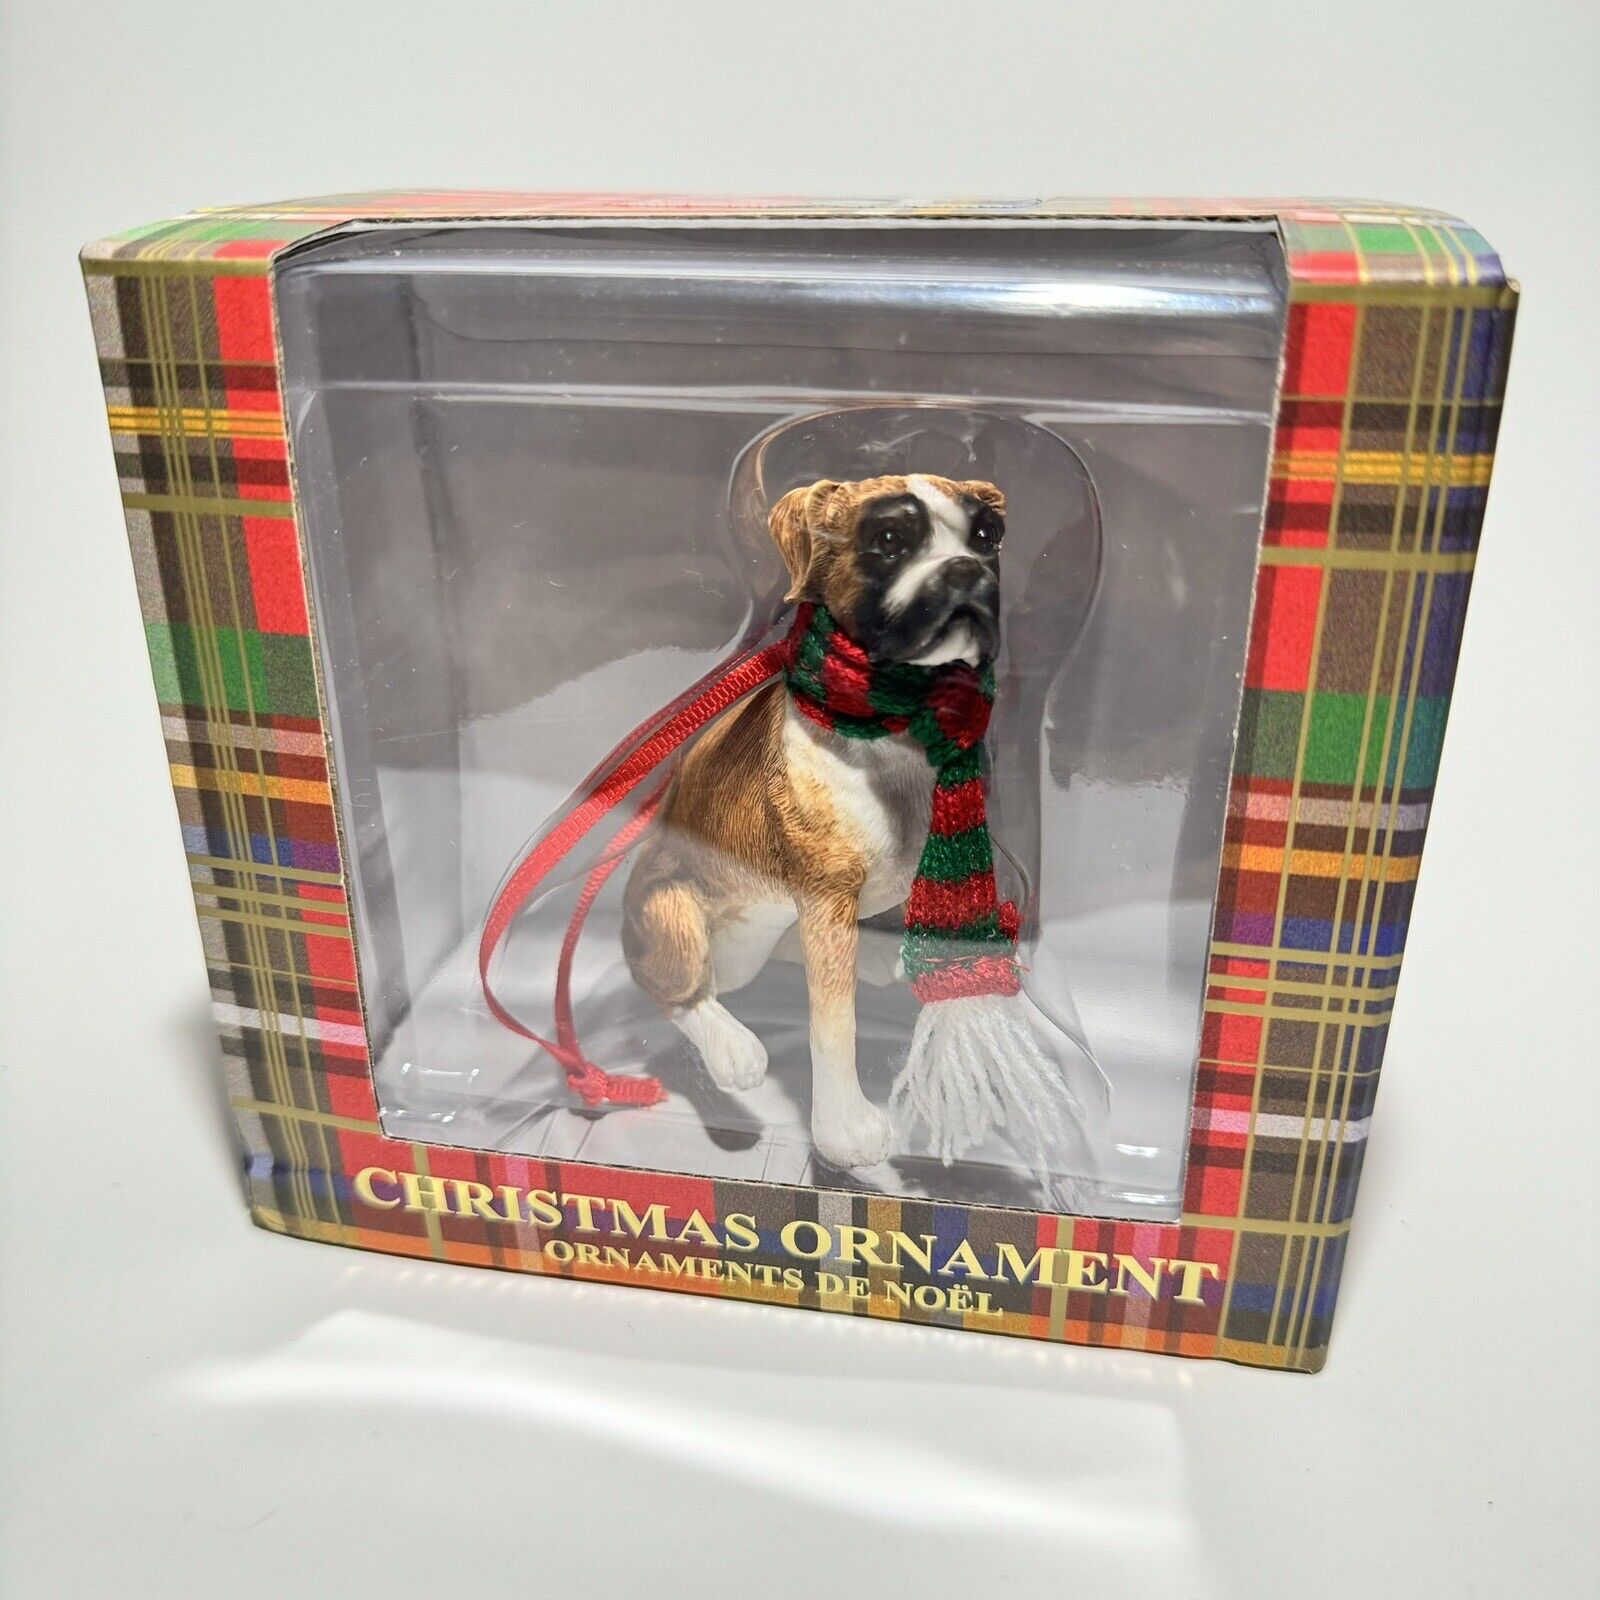 Boxer in Scarf Dog Christmas Holiday Ornament Sandicast Ornaments De Noël